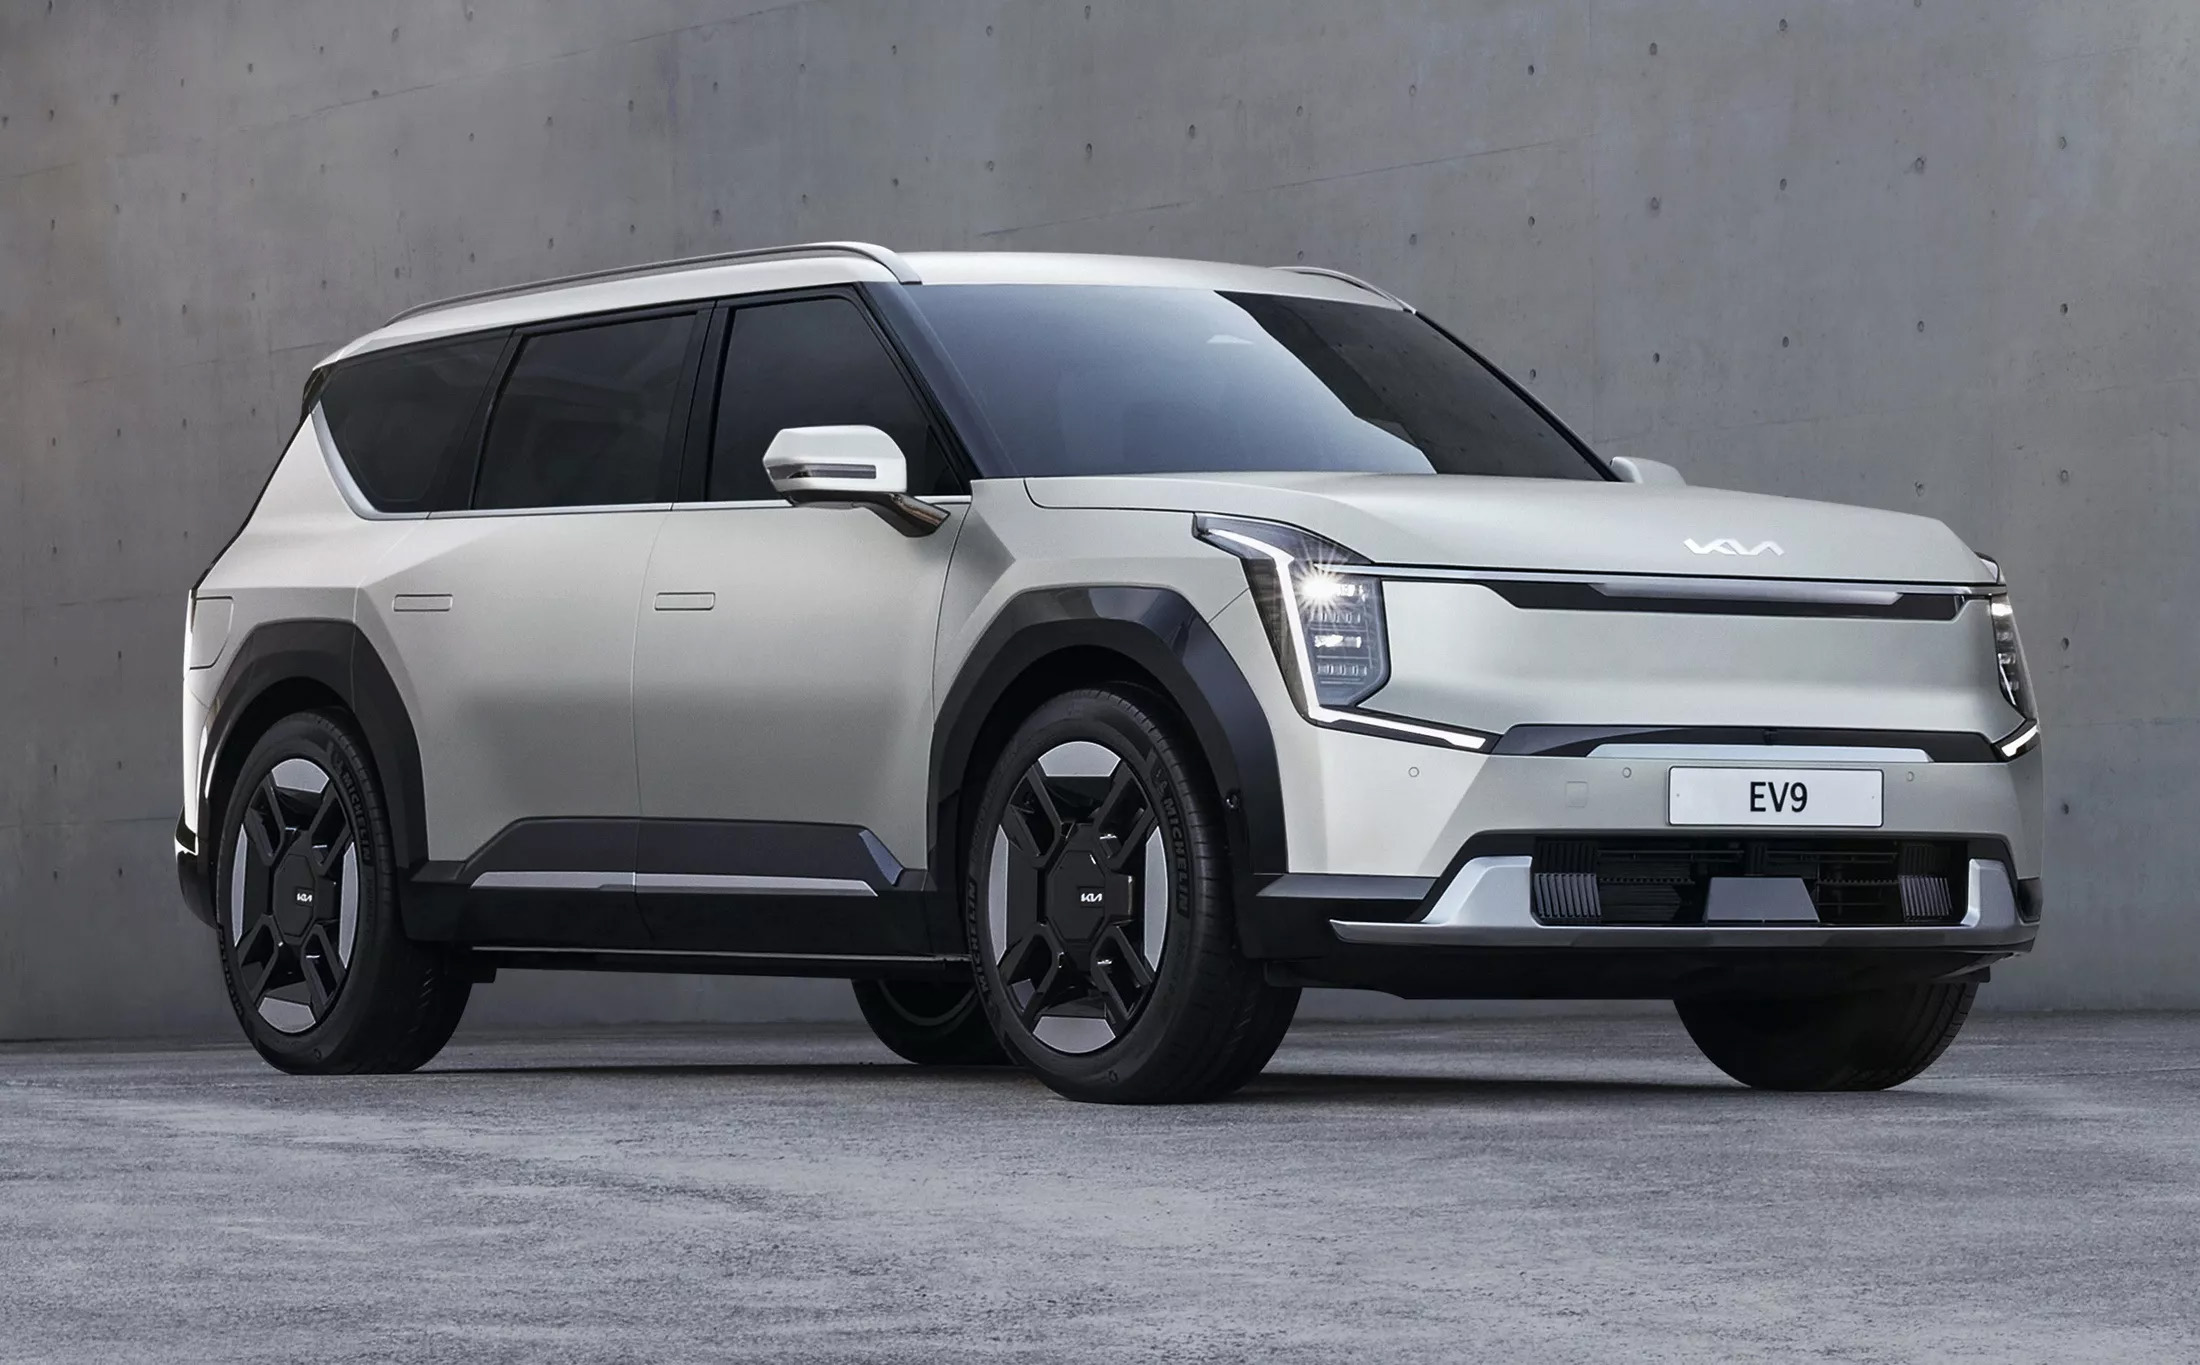 Kia has never had such a car.  The large flagship crossover Kia EV9 is presented – with a futuristic design, a powerful power plant and swivel seats